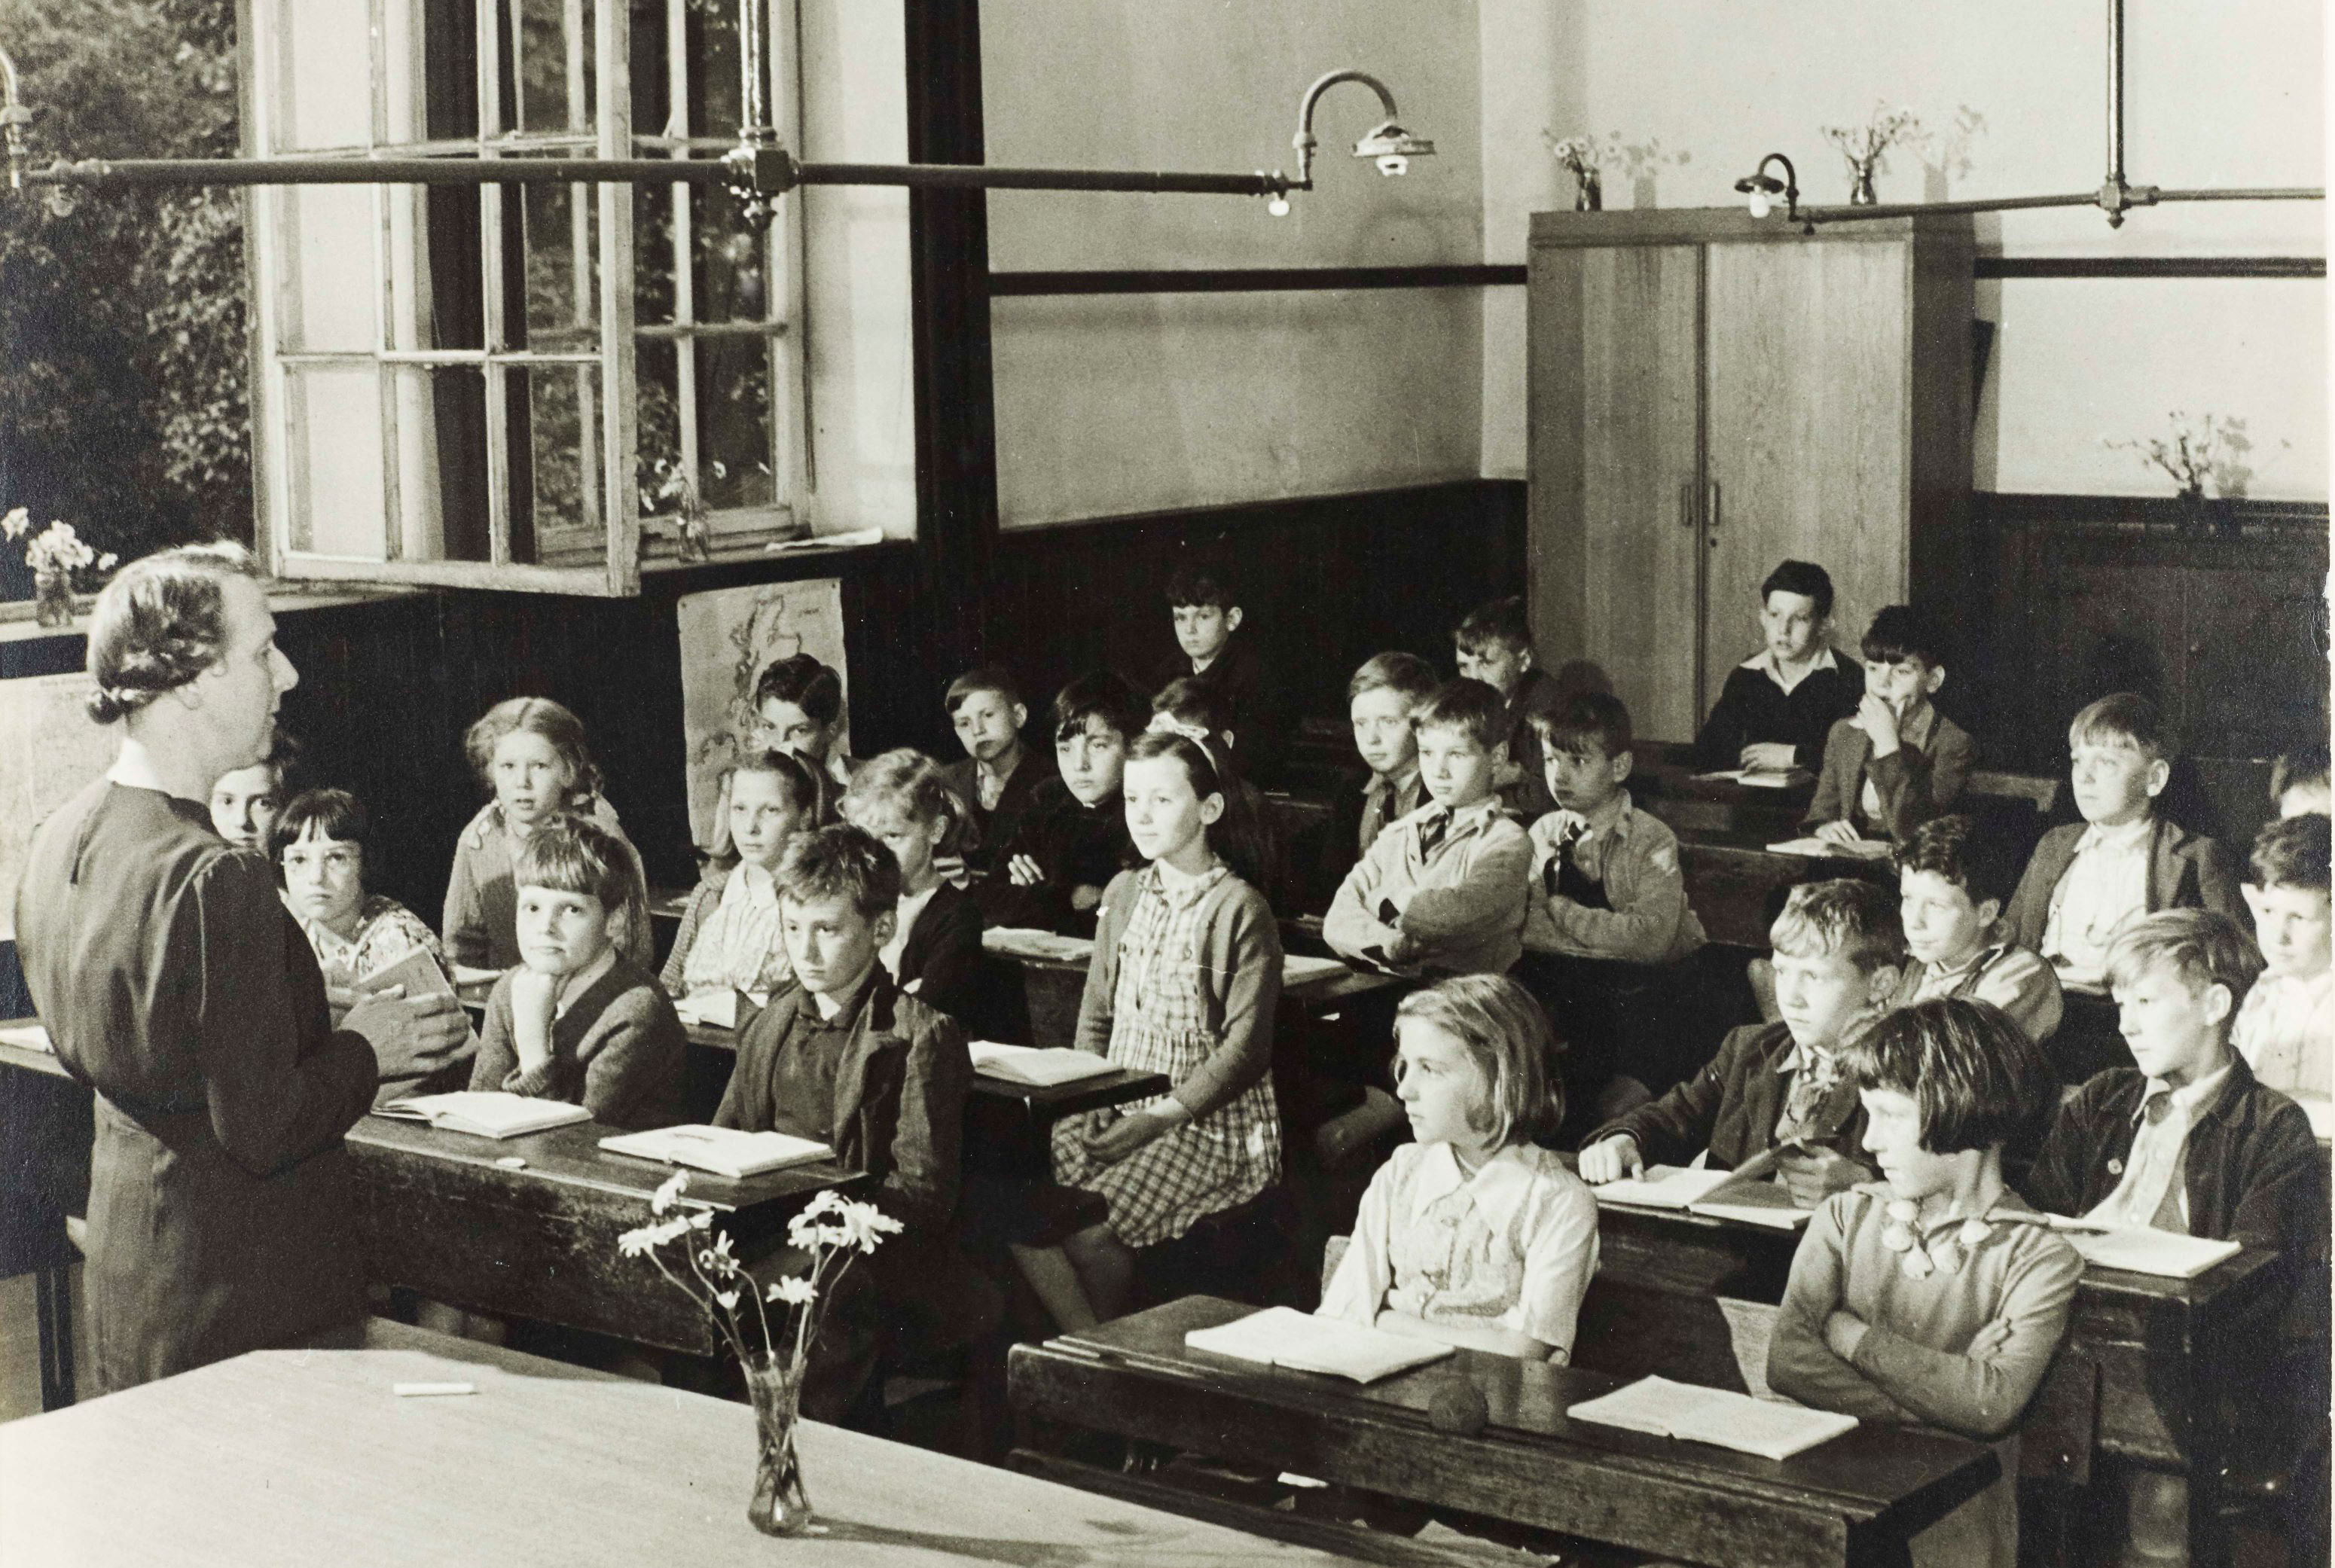 A picture of an old classroom